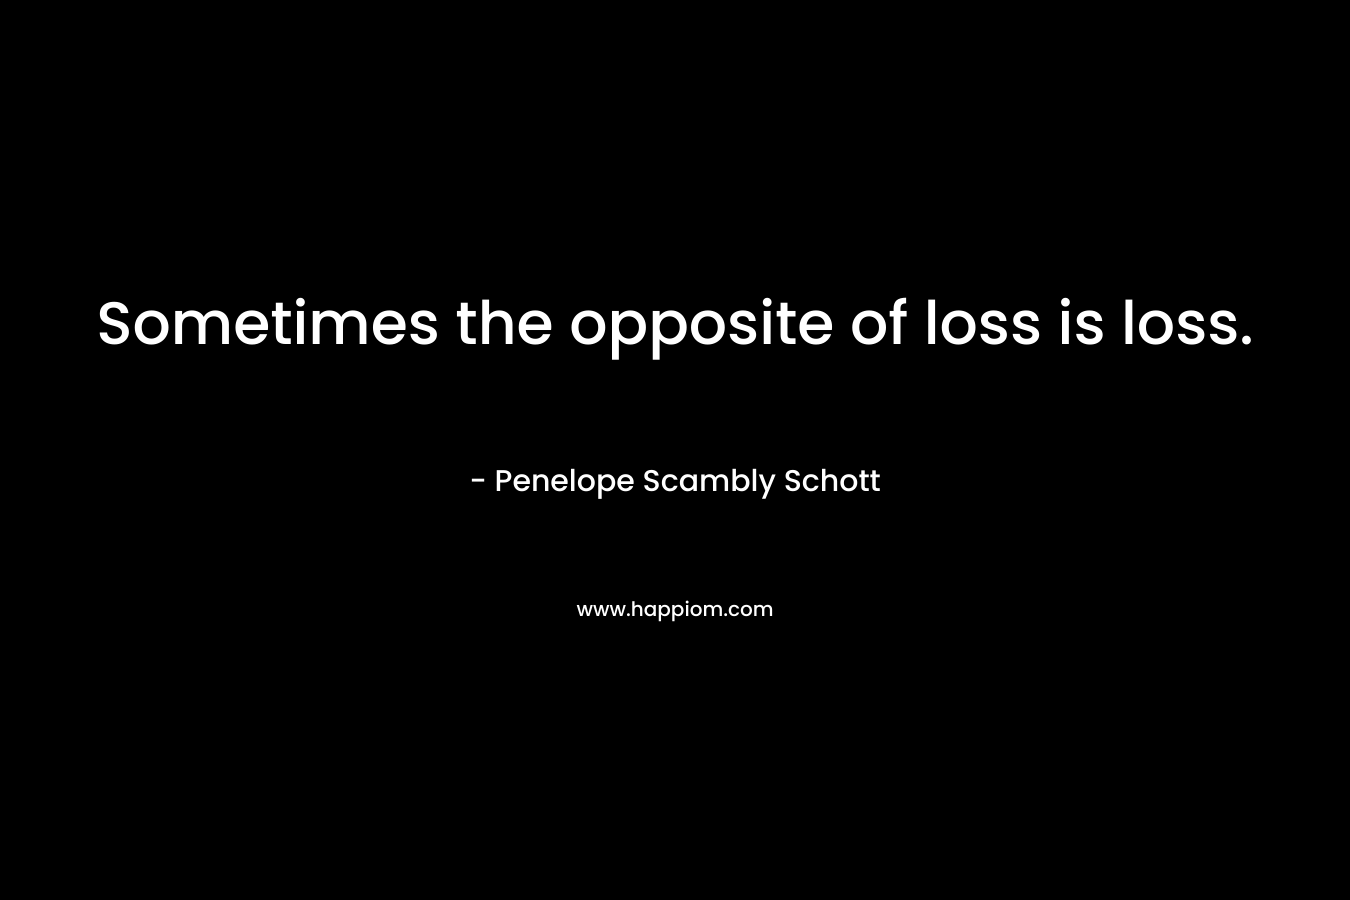 Sometimes the opposite of loss is loss. – Penelope Scambly Schott